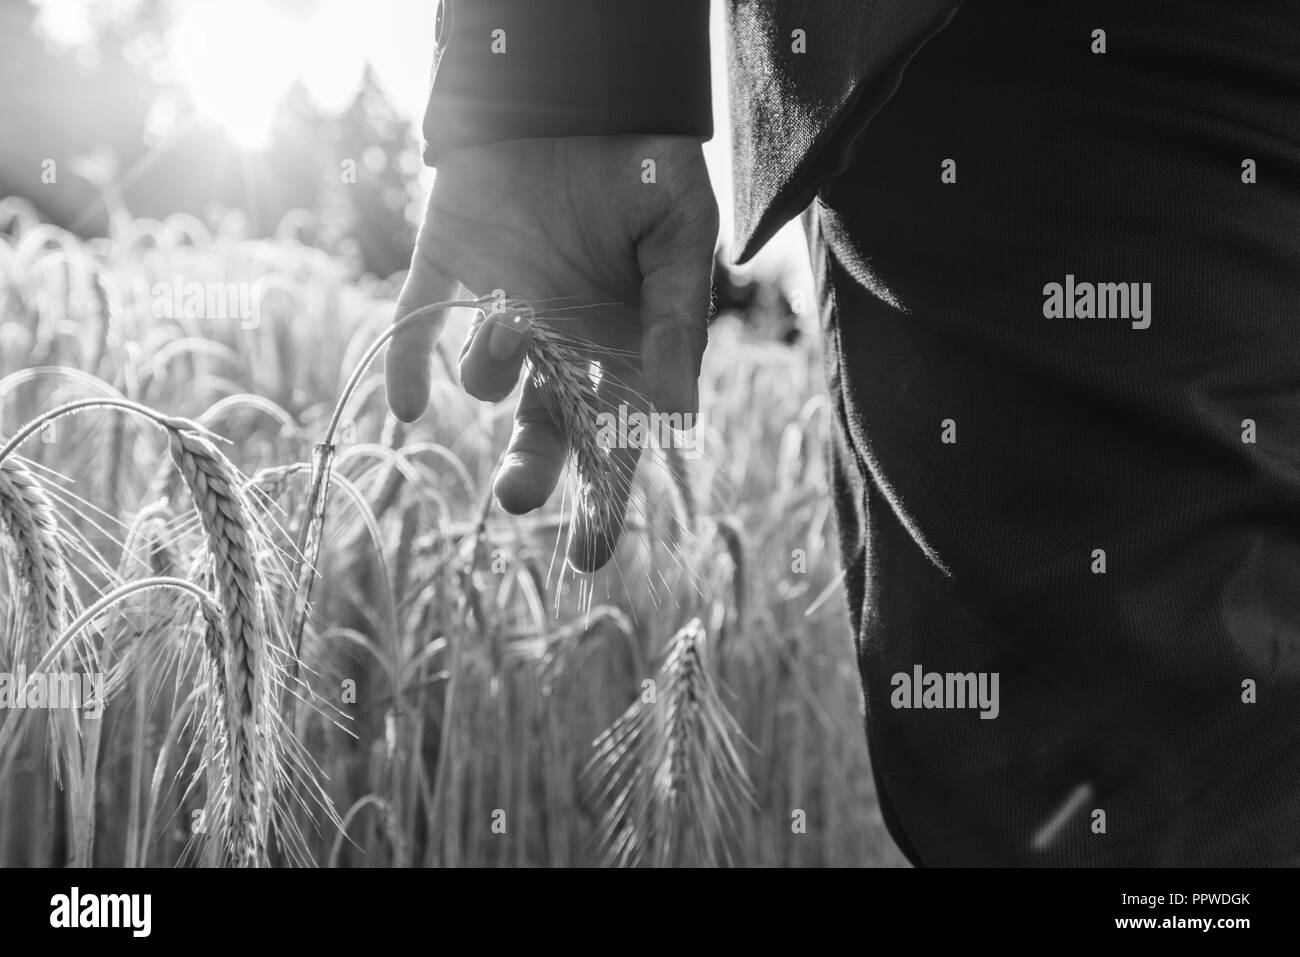 Black and white image of businessman holding ripening ear of wheat growing in summer field. Stock Photo